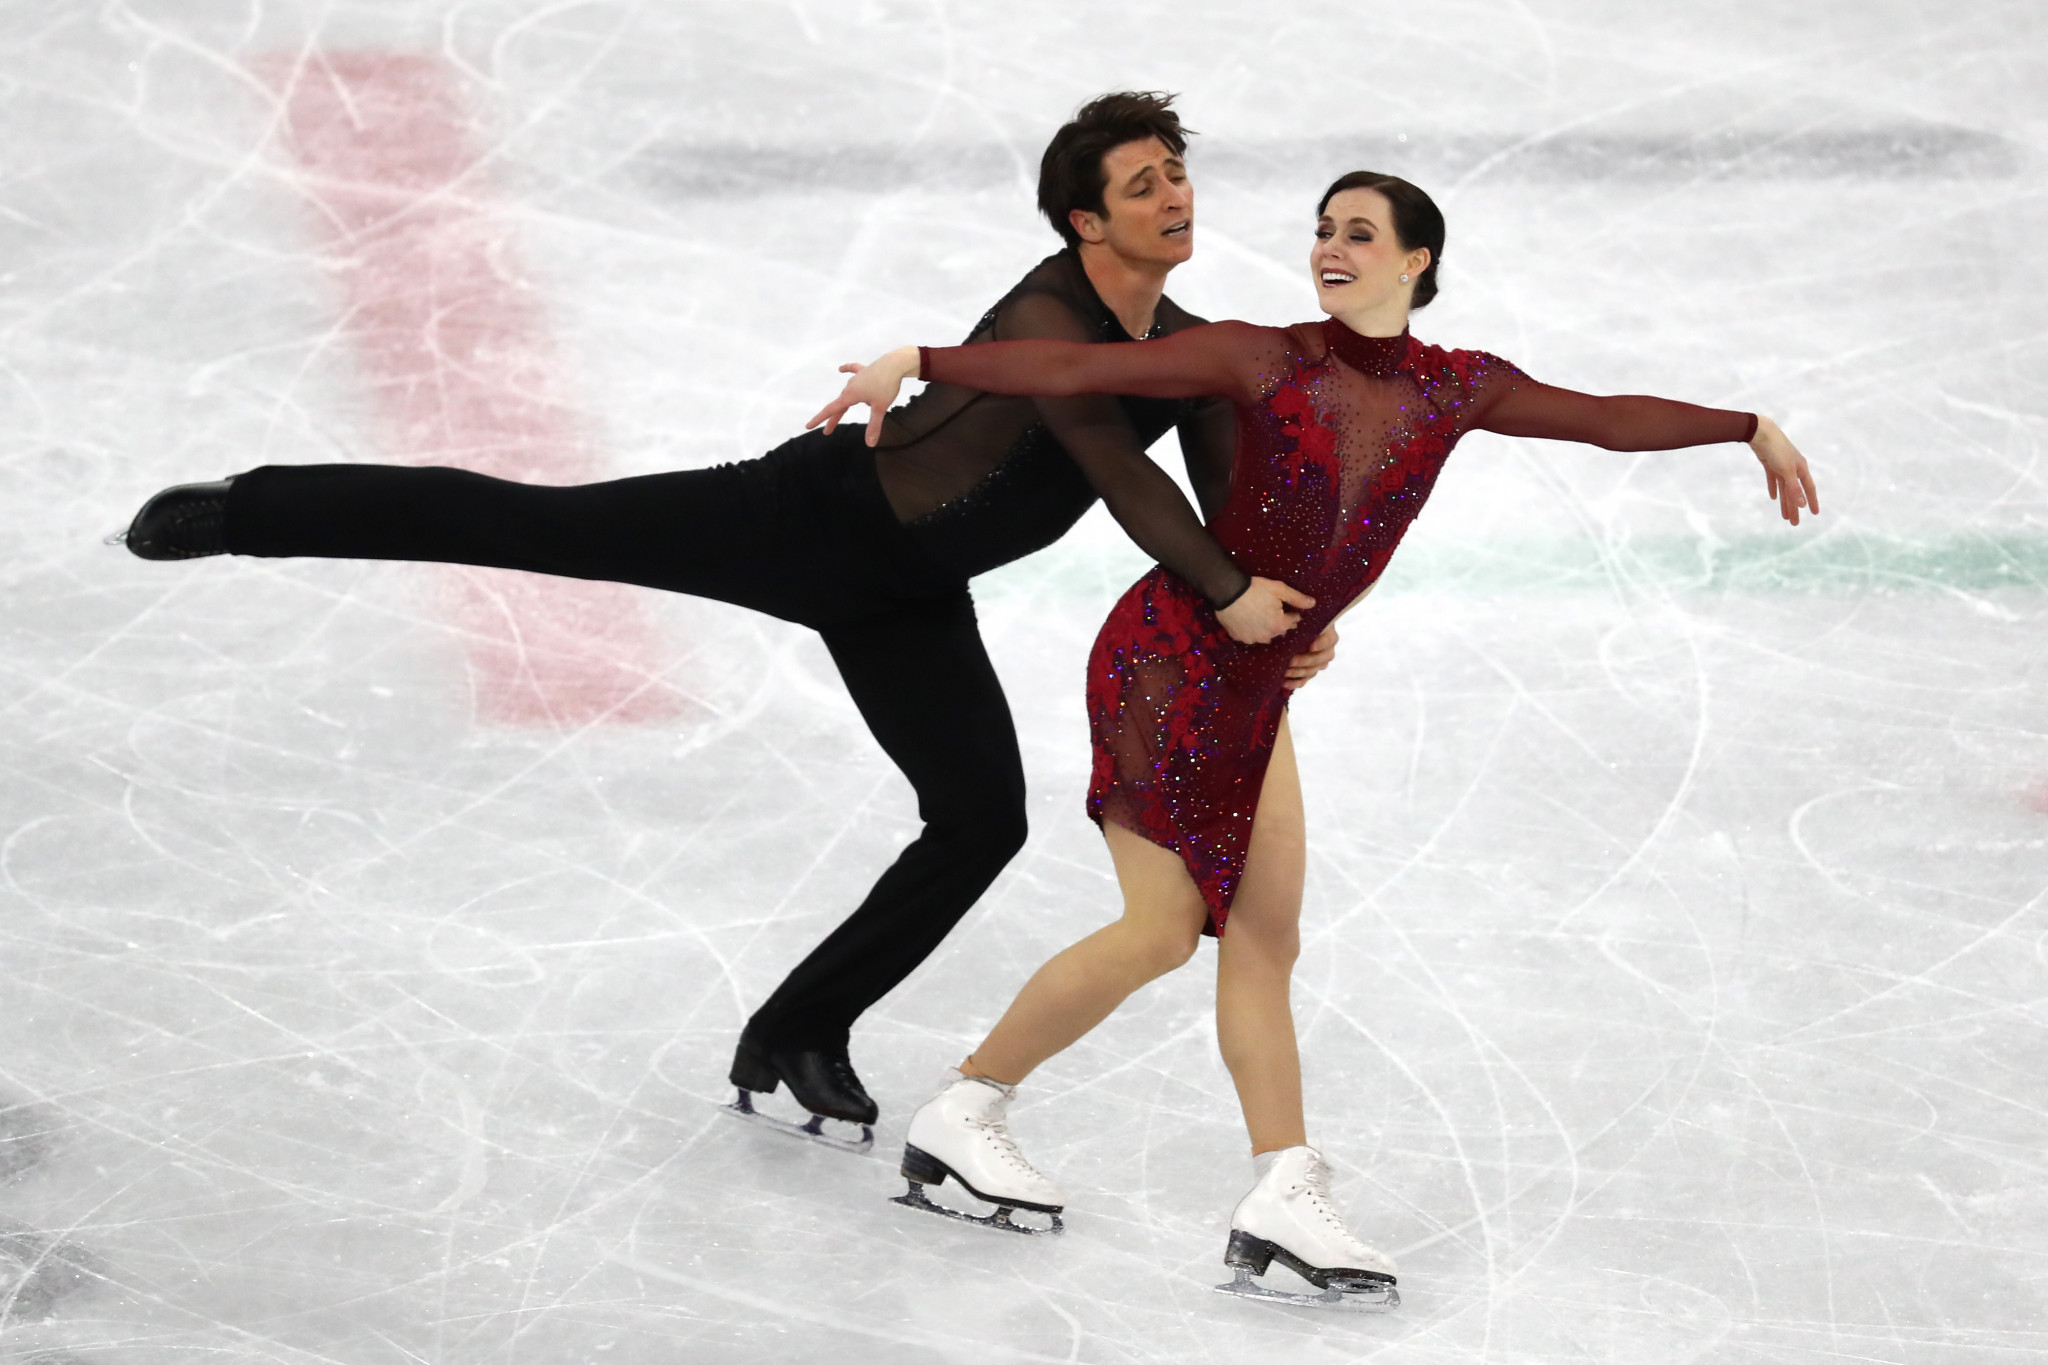 Scott Moir and Tessa Virtue completed the team event in style ©Getty Images